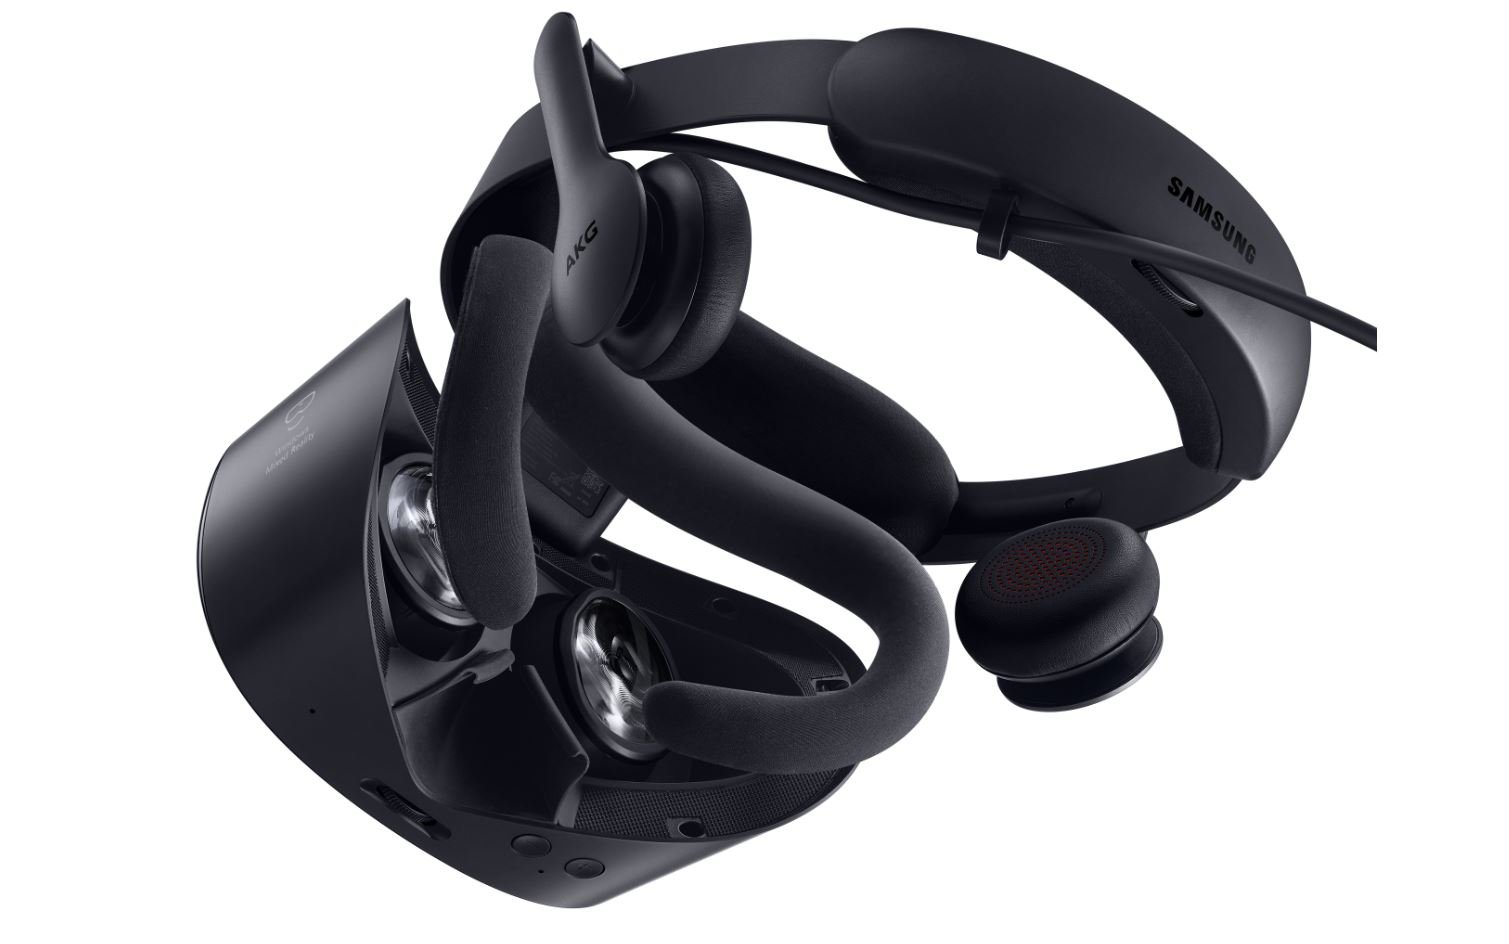 Deal Alert: Samsung HMD Odyssey+ VR headset now available for just $229